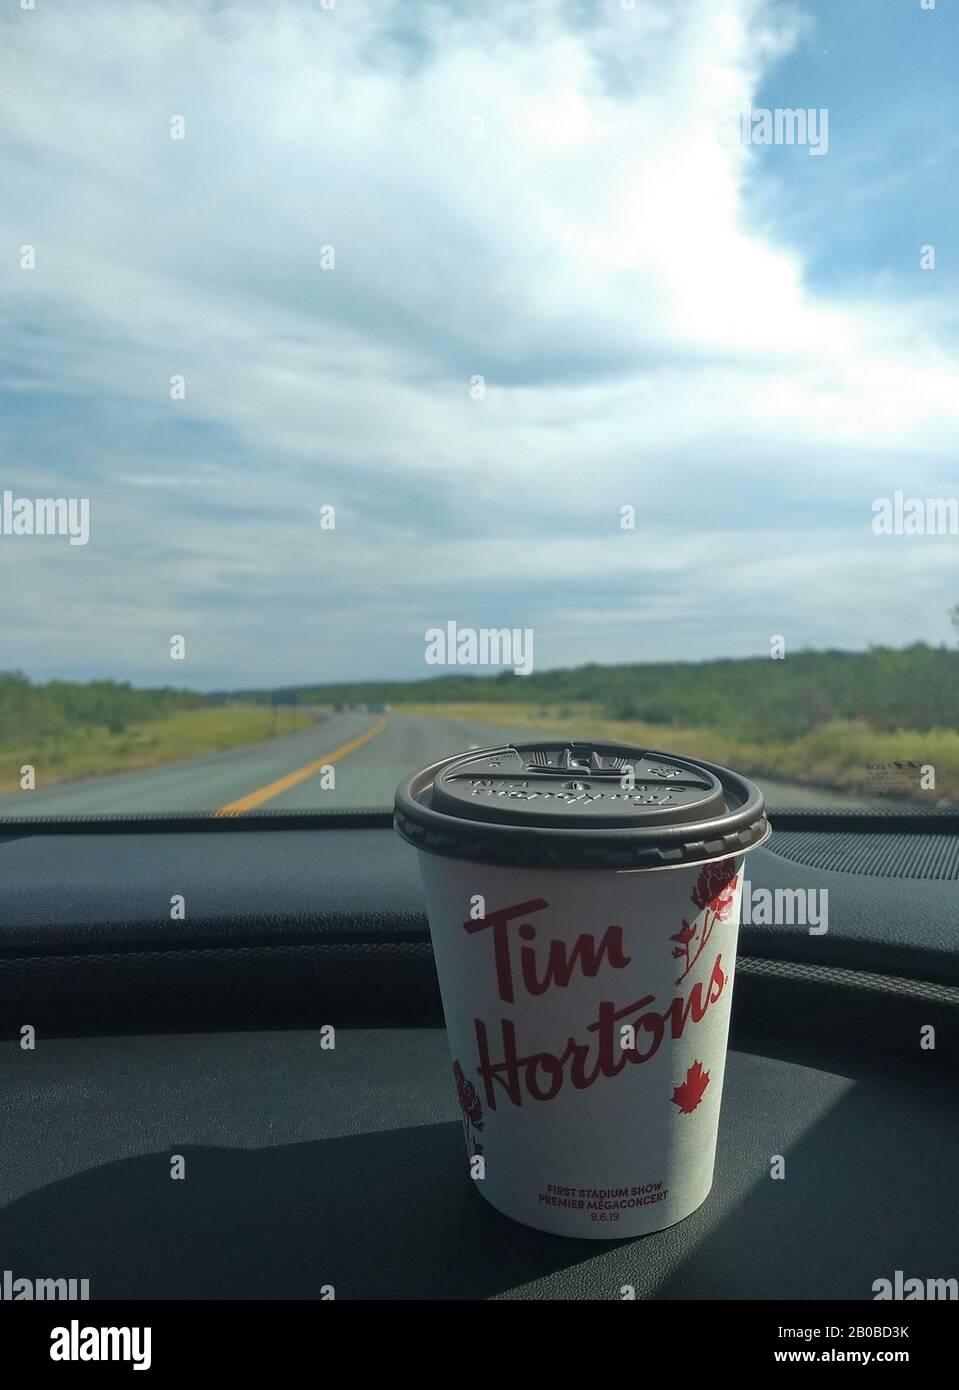 Tim Hortons Coffee Cup On Car Dashboard Travel Canada Stock Photo Alamy